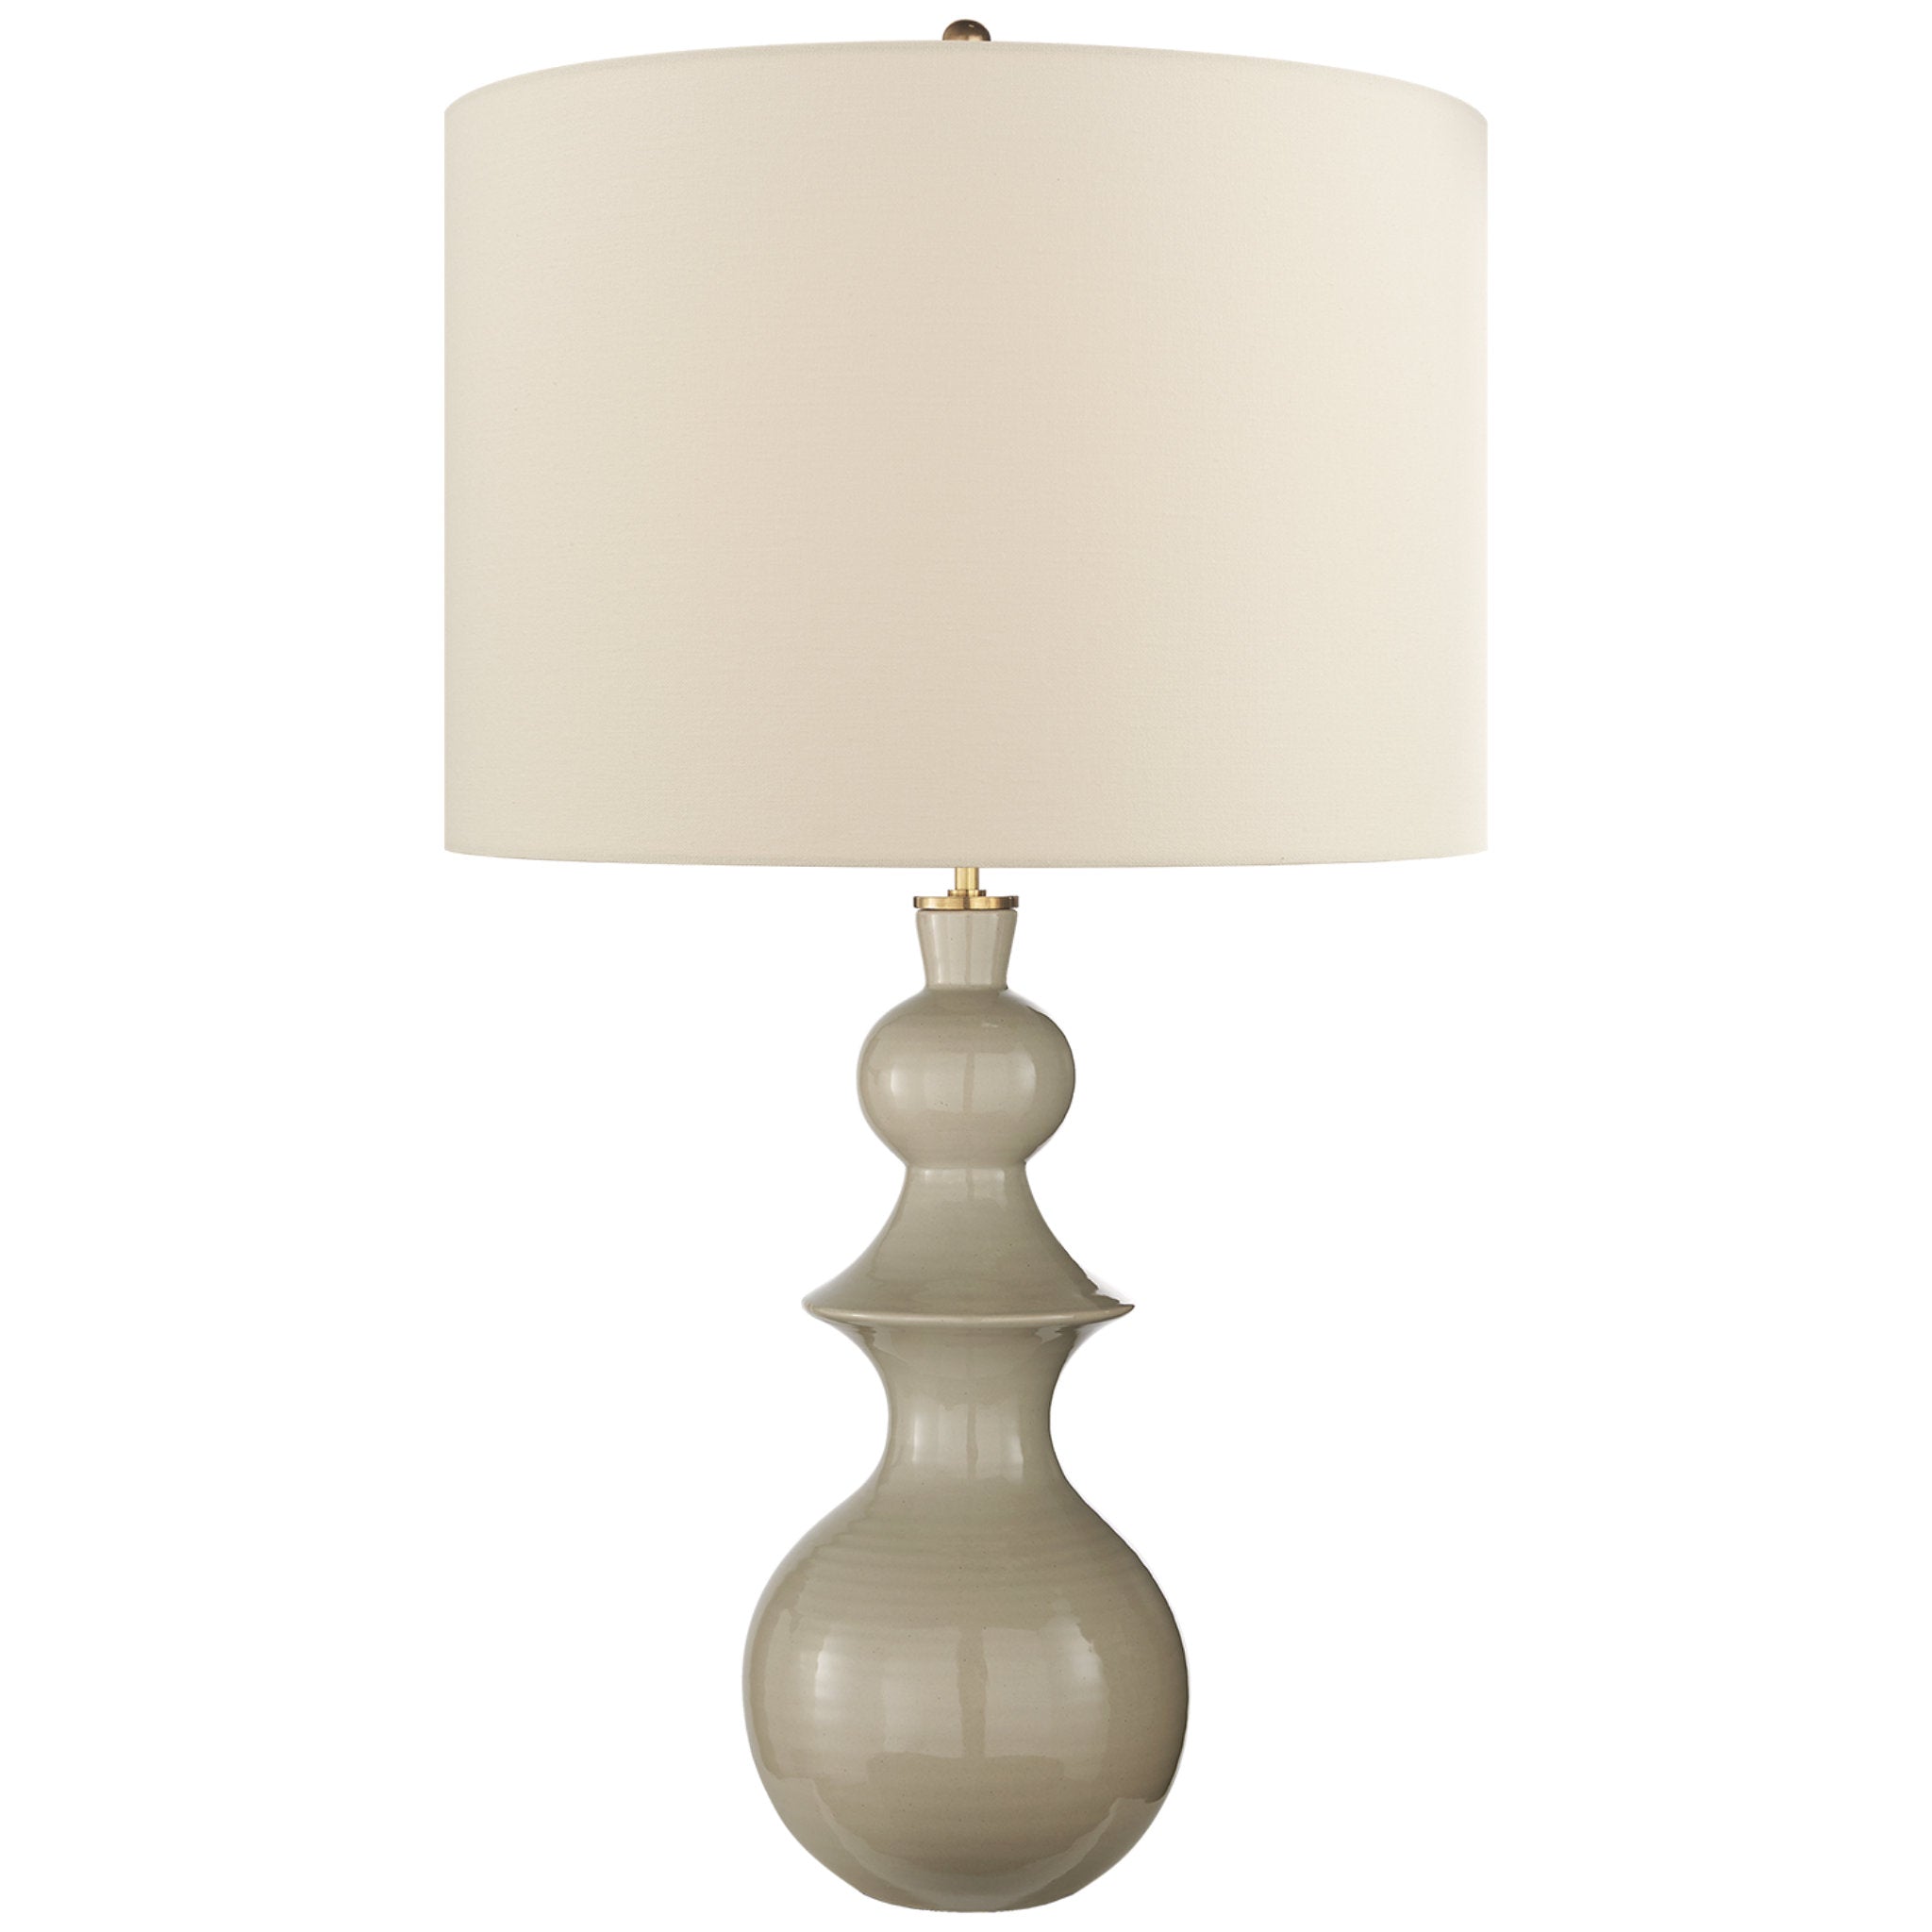 kate spade new york Saxon Large Table Lamp in Dove Grey with Cream Linen Shade